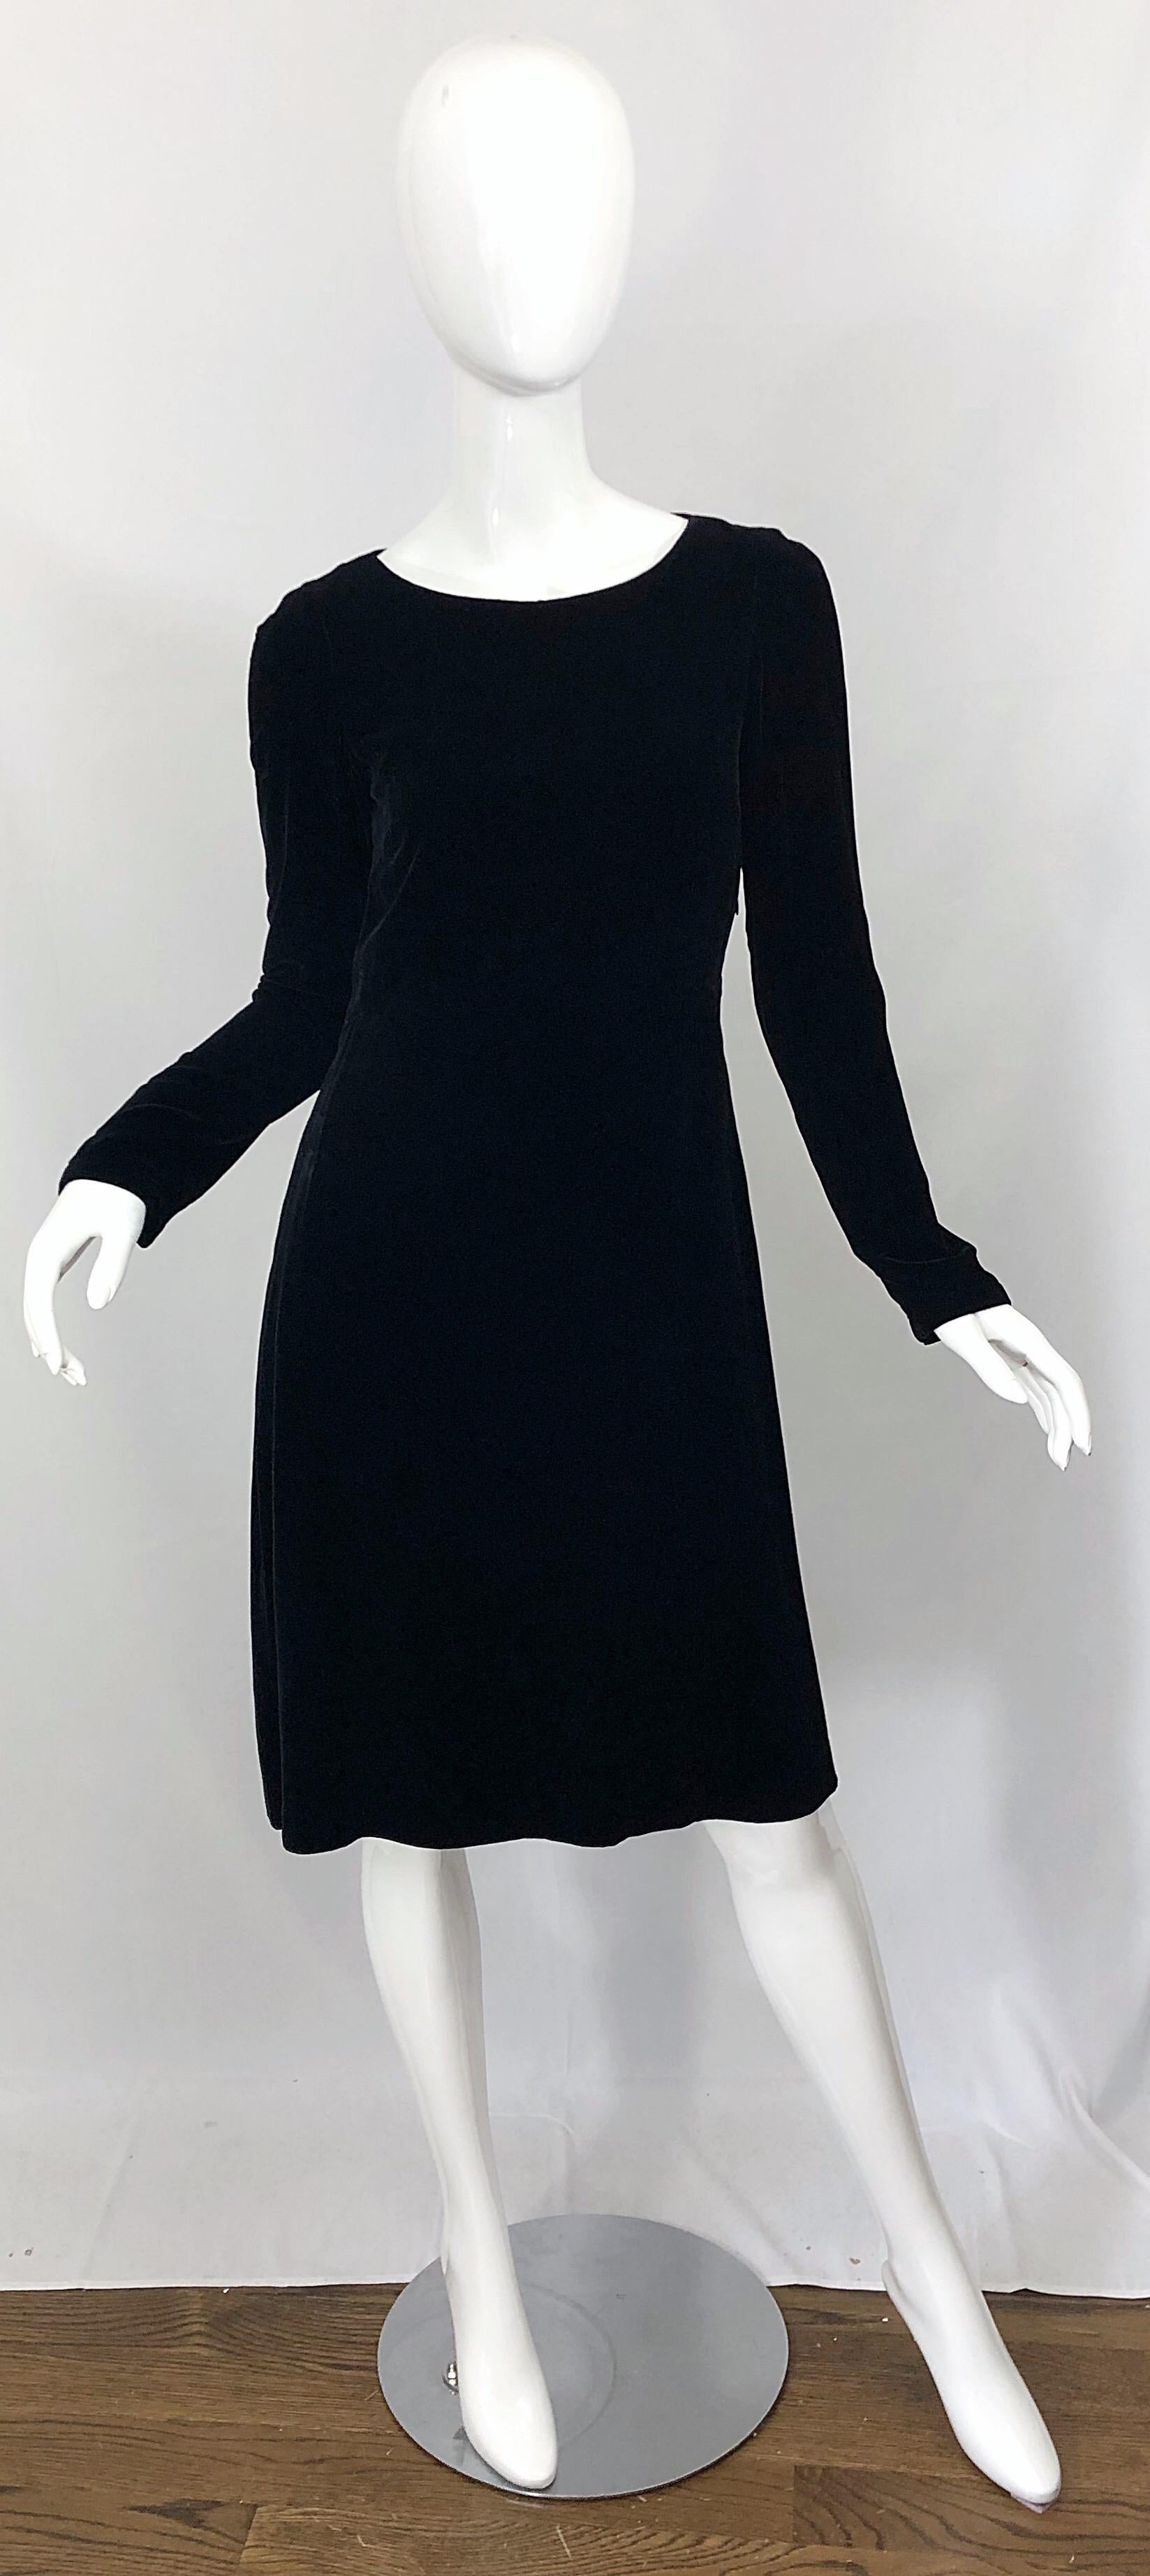 Chic early 90s JIL SANDER black lightweight velvet minimalist long sleeve dress! Features a luxurious silk and rayon blended lightweight velvet fabric. Flattering and easy fit. Tailored bodice with a babydoll like silhouette. Hidden zipper up the